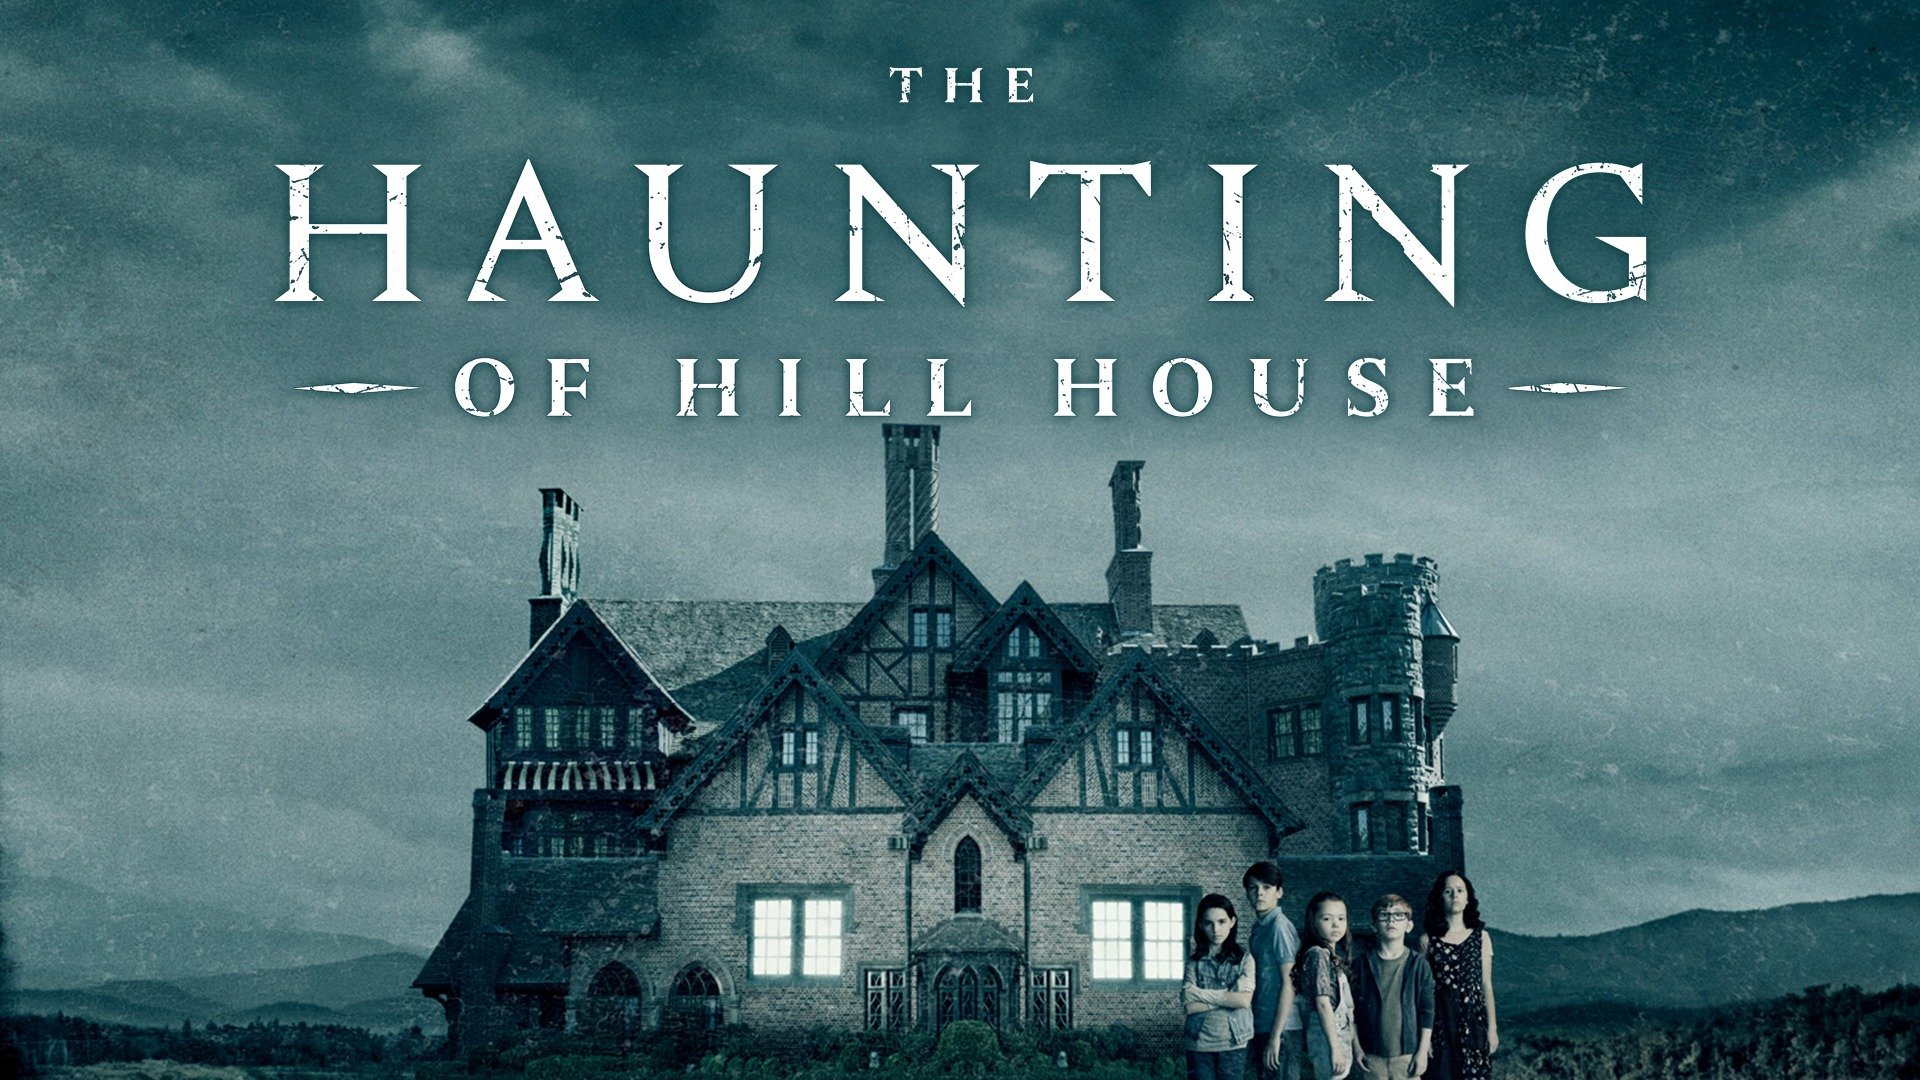 Of hill house the haunting The Haunting